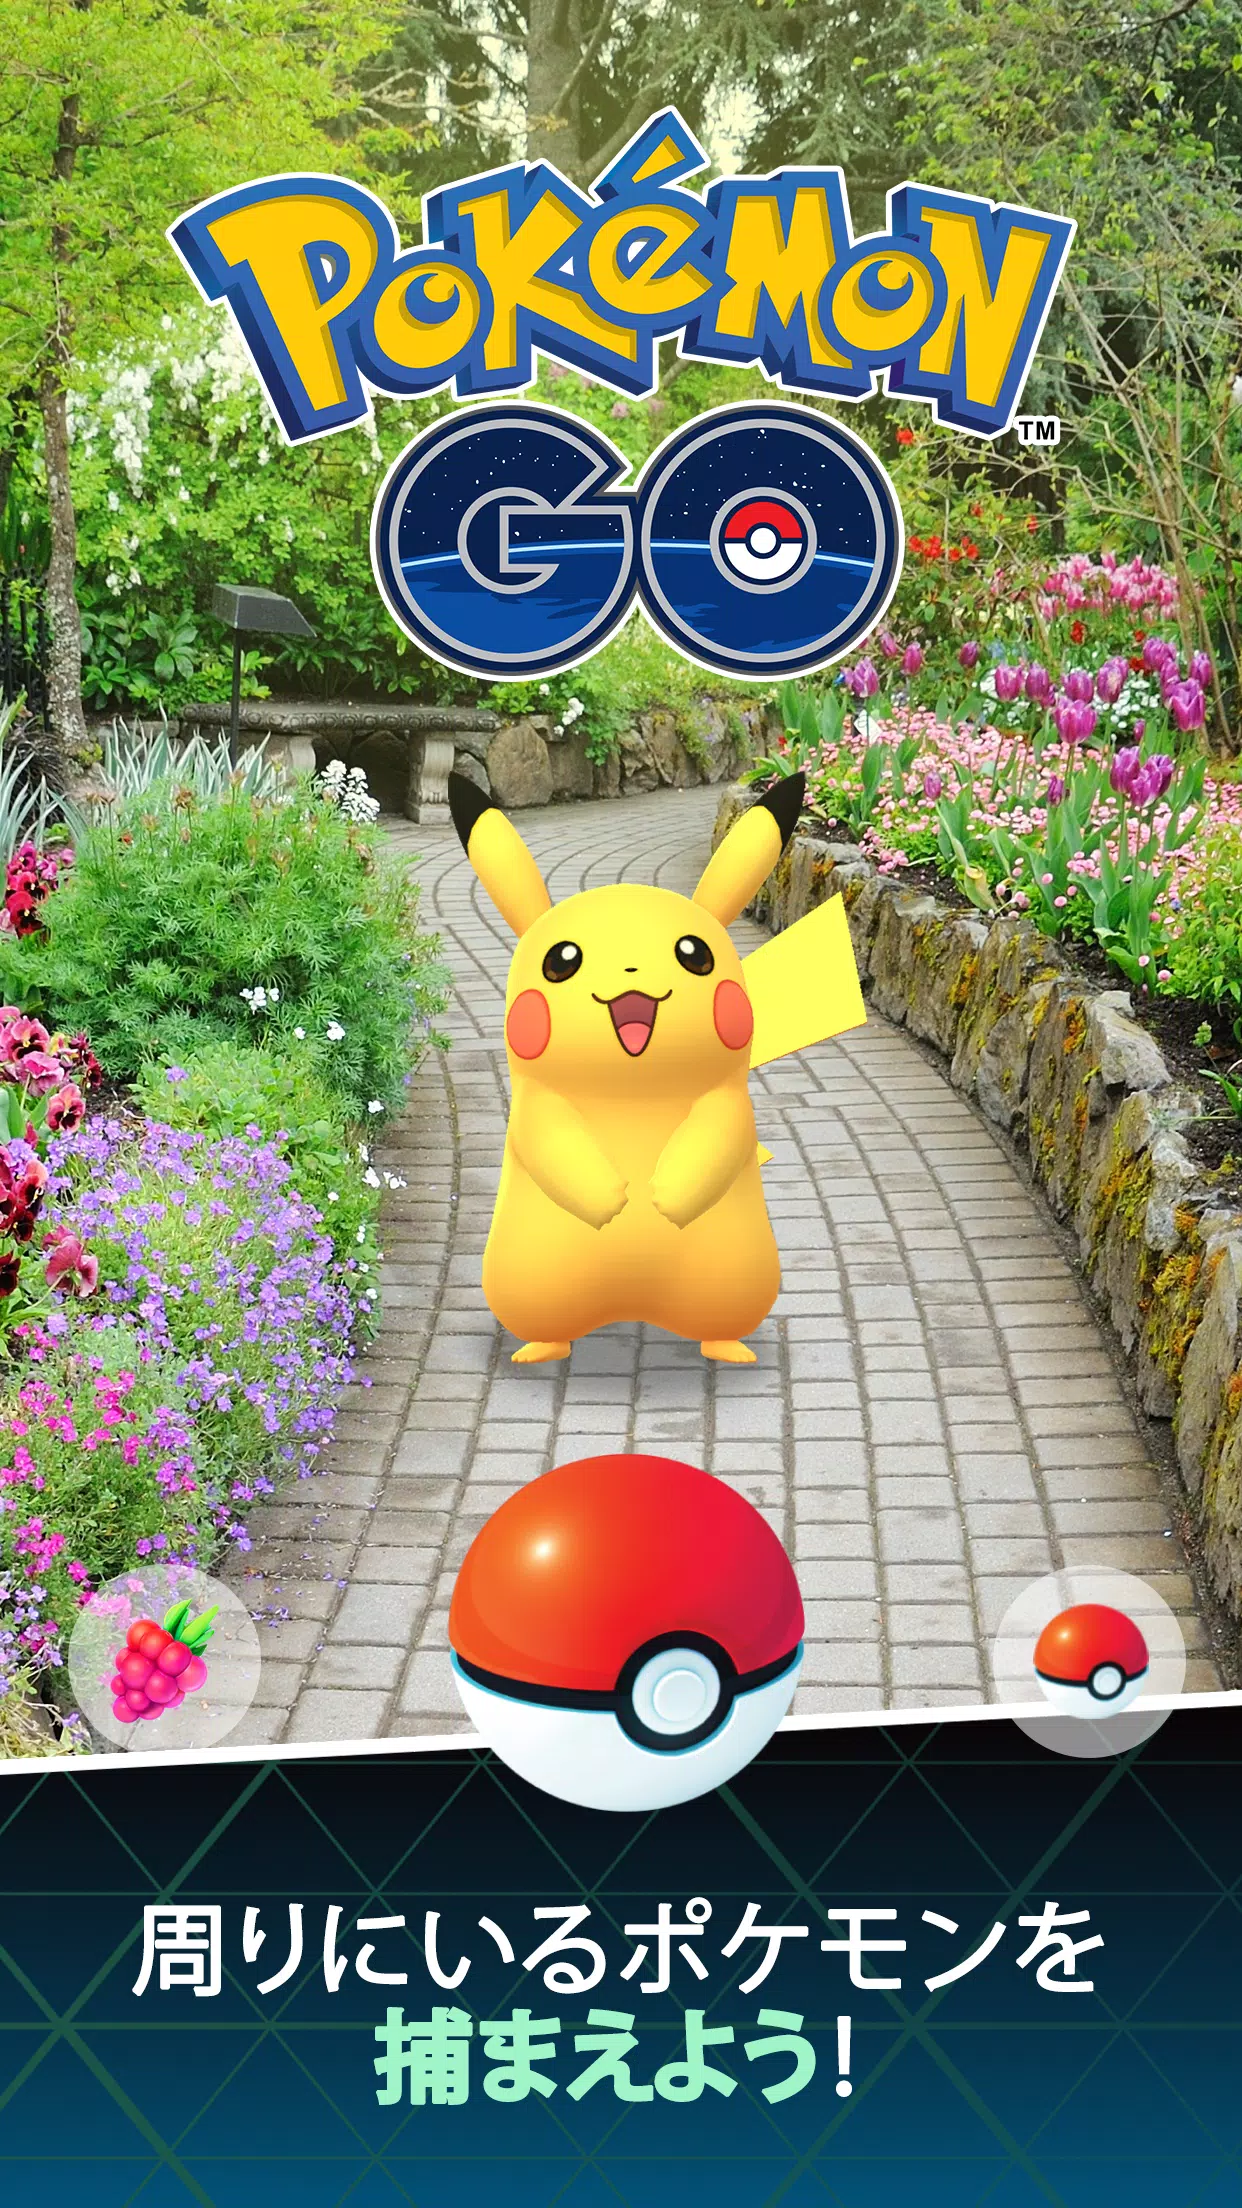 Pokemon Go Apk 0 231 0 Download The Best Real World Adventure Game For Android